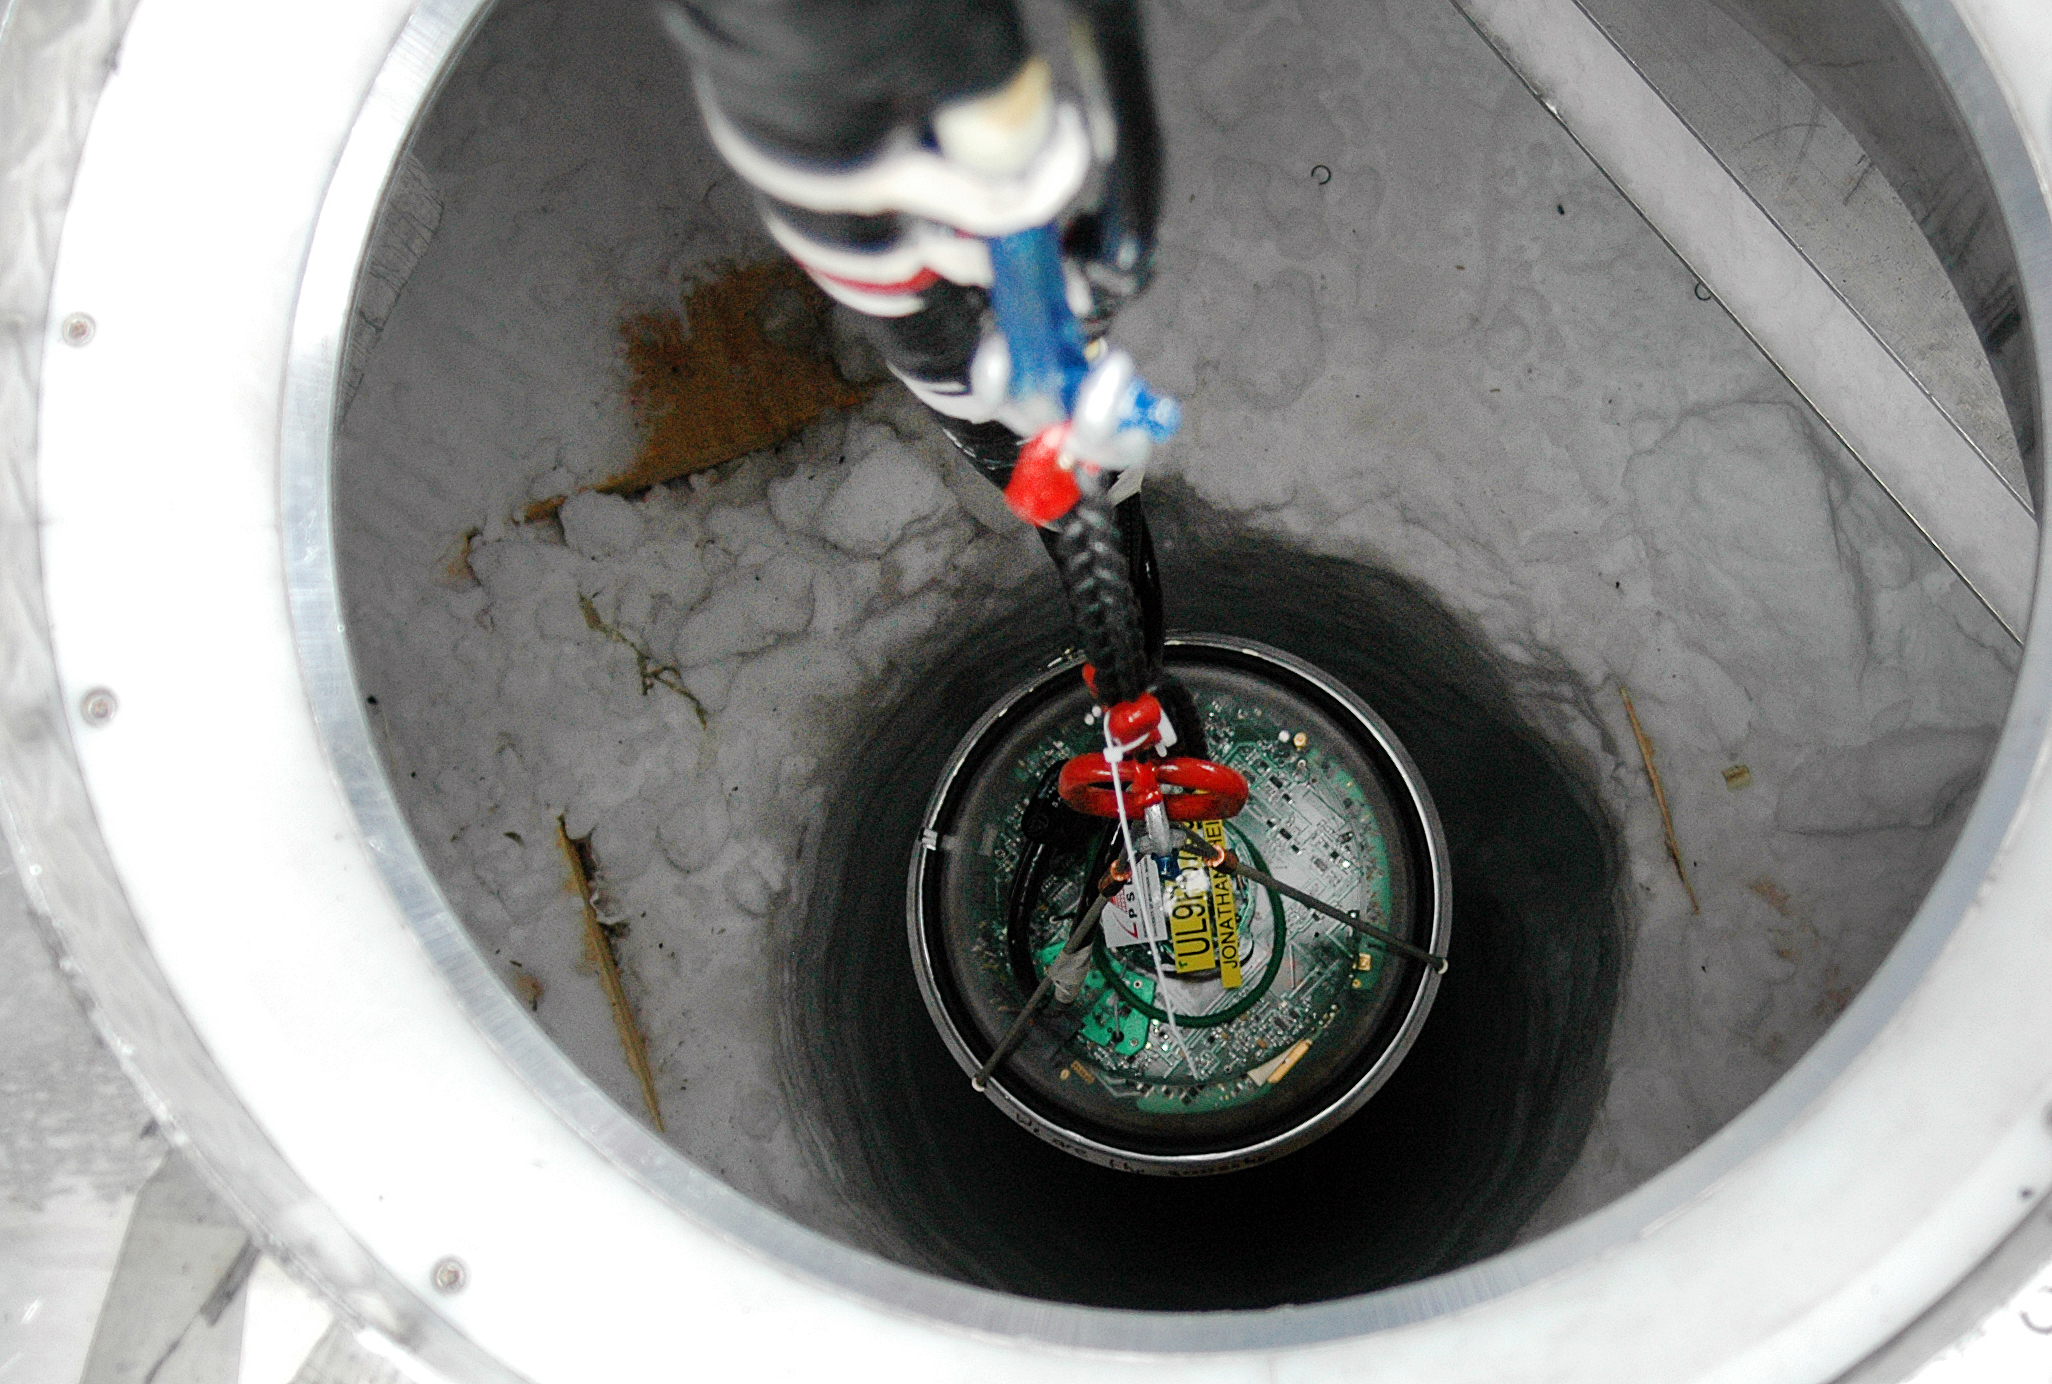 A sphere-shaped scientific instrument being lowered into a hole.